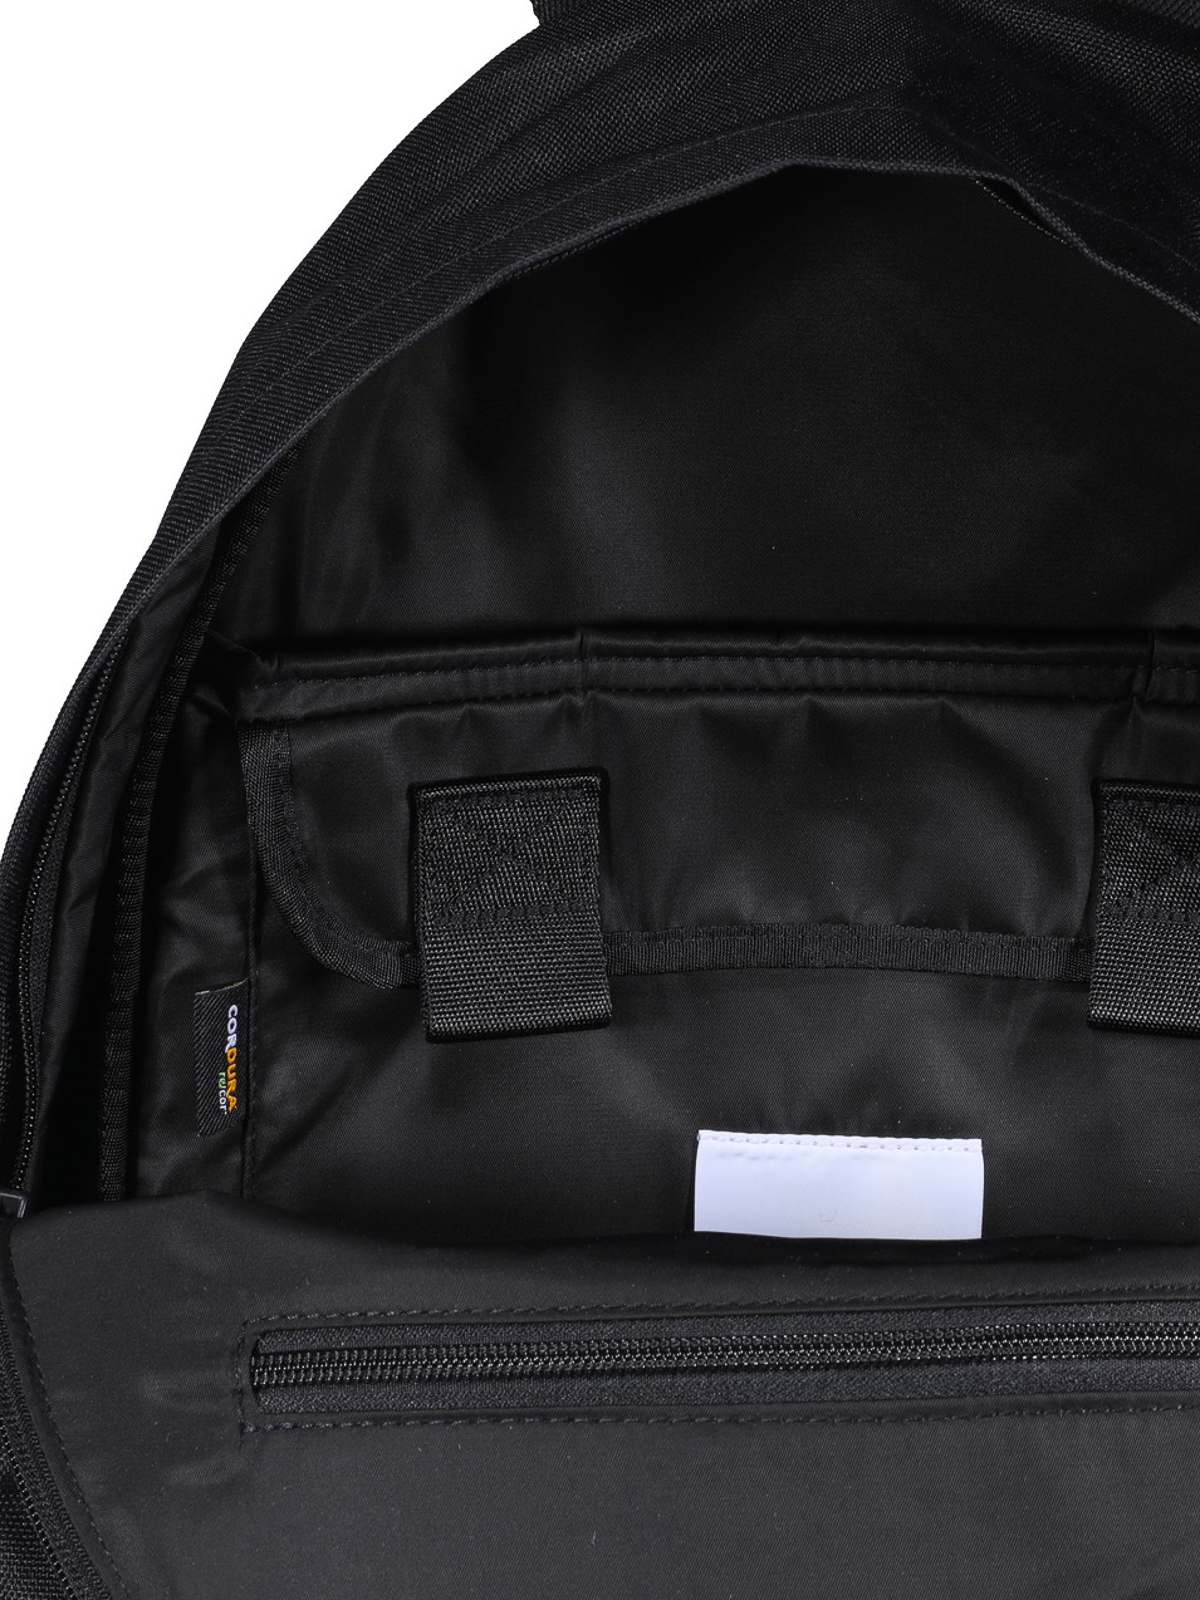 Backpacks Y-3 - Classic backpack - HM8348 | Shop online at THEBS